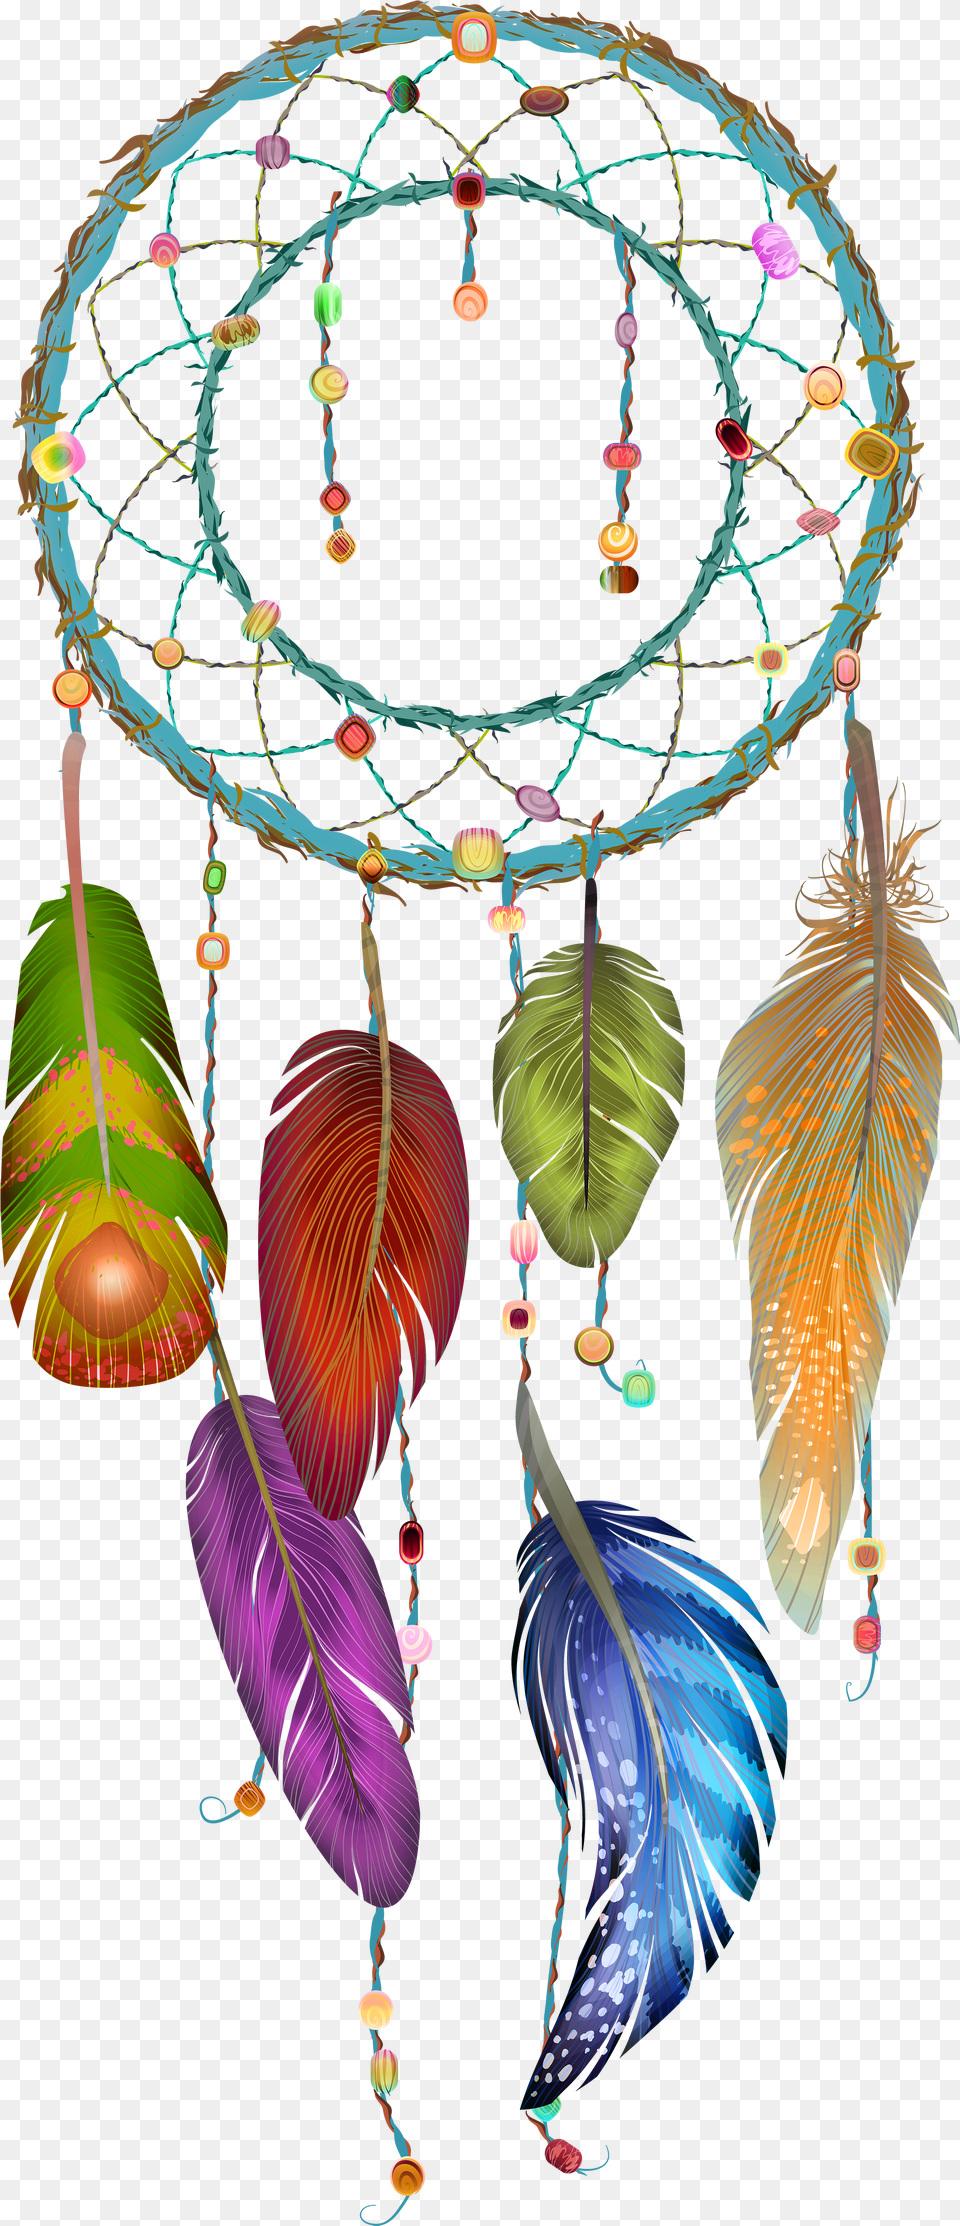 Feathers Clipart Realistic Dream Catcher Drawing Free Transparent Png